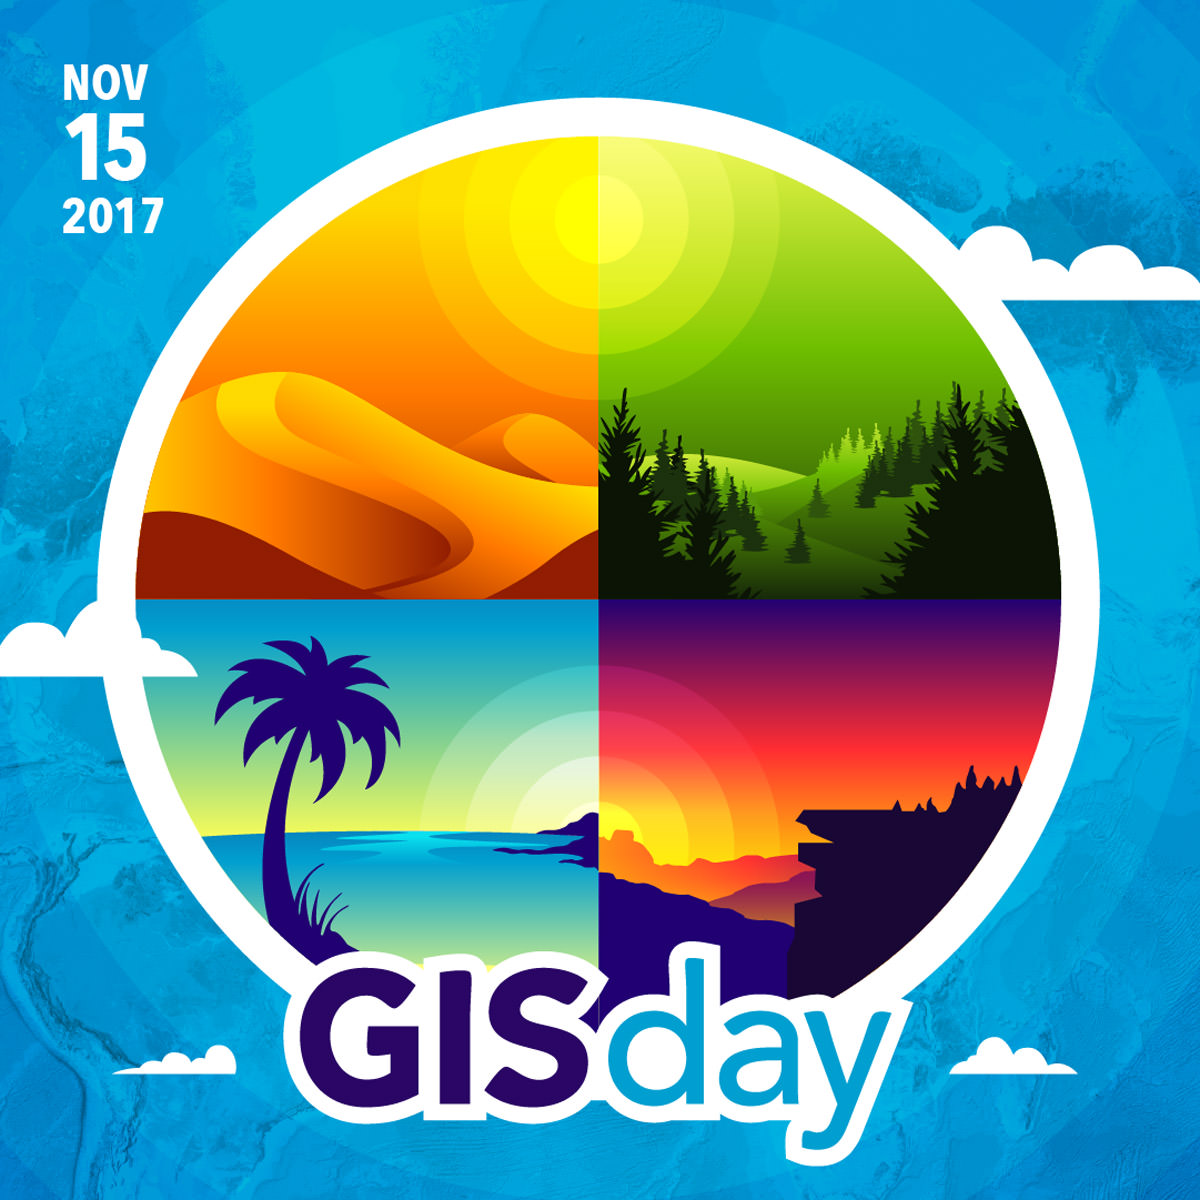 GIS Day 2017 Showcases The Science of Where around the World Nineteenth Annual Event Will Take Place November 15 and Feature the International S...